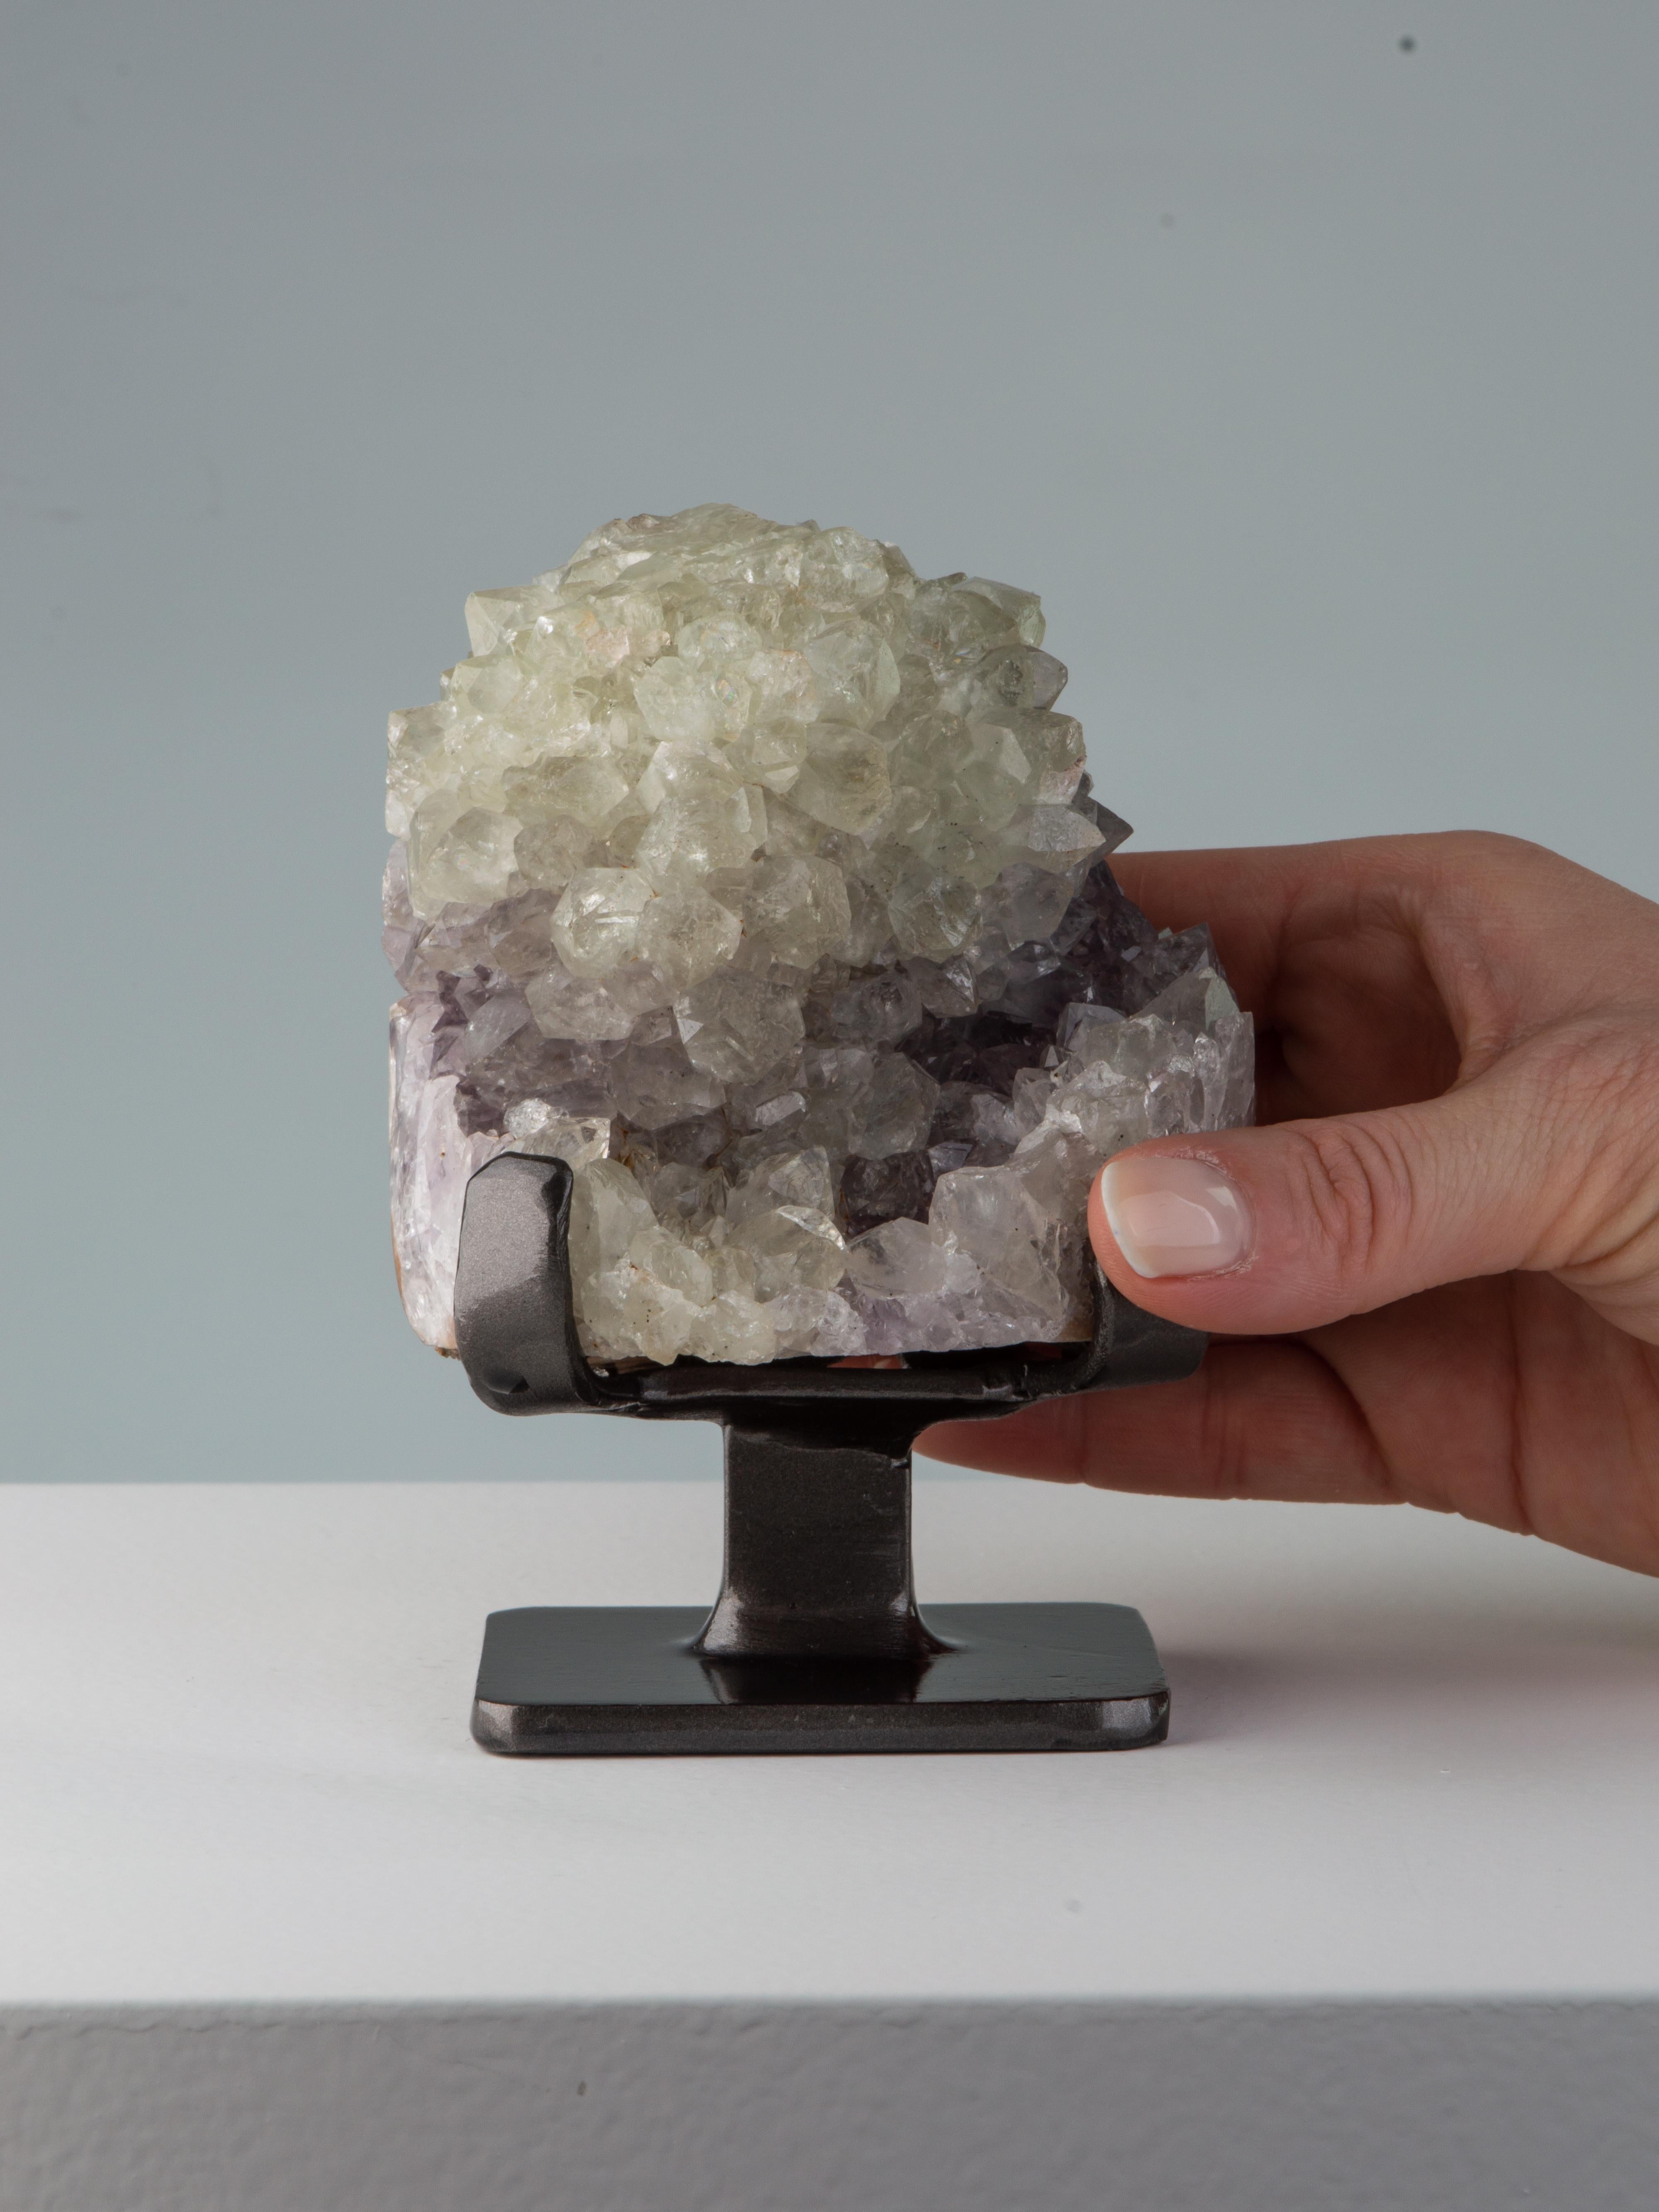 A small formation consisting of a white quartz stalactite on a bed on lilac
amethyst.

This piece was legally and ethically sourced directly in the prestigious mines of Uruguay, South America. Uruguayan amethyst is internationally recognised as